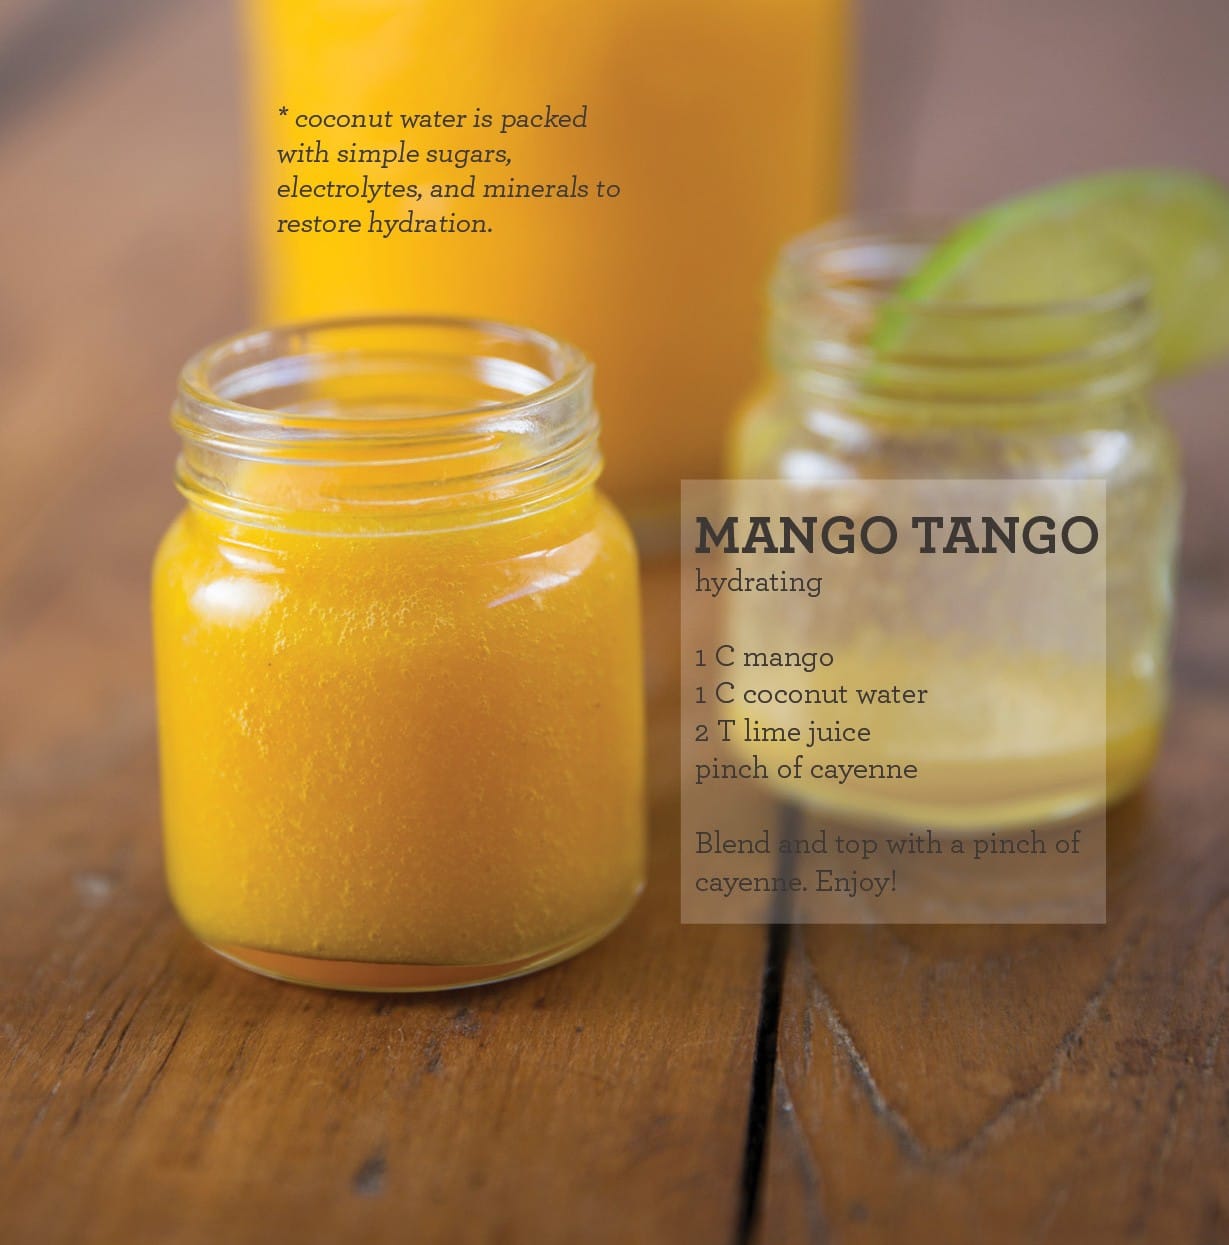 Had a little too much wine last night? Too many hours on a plane? Soak up our hydrating Mango Tango smoothie and feel immediate gratifi-hydration. 